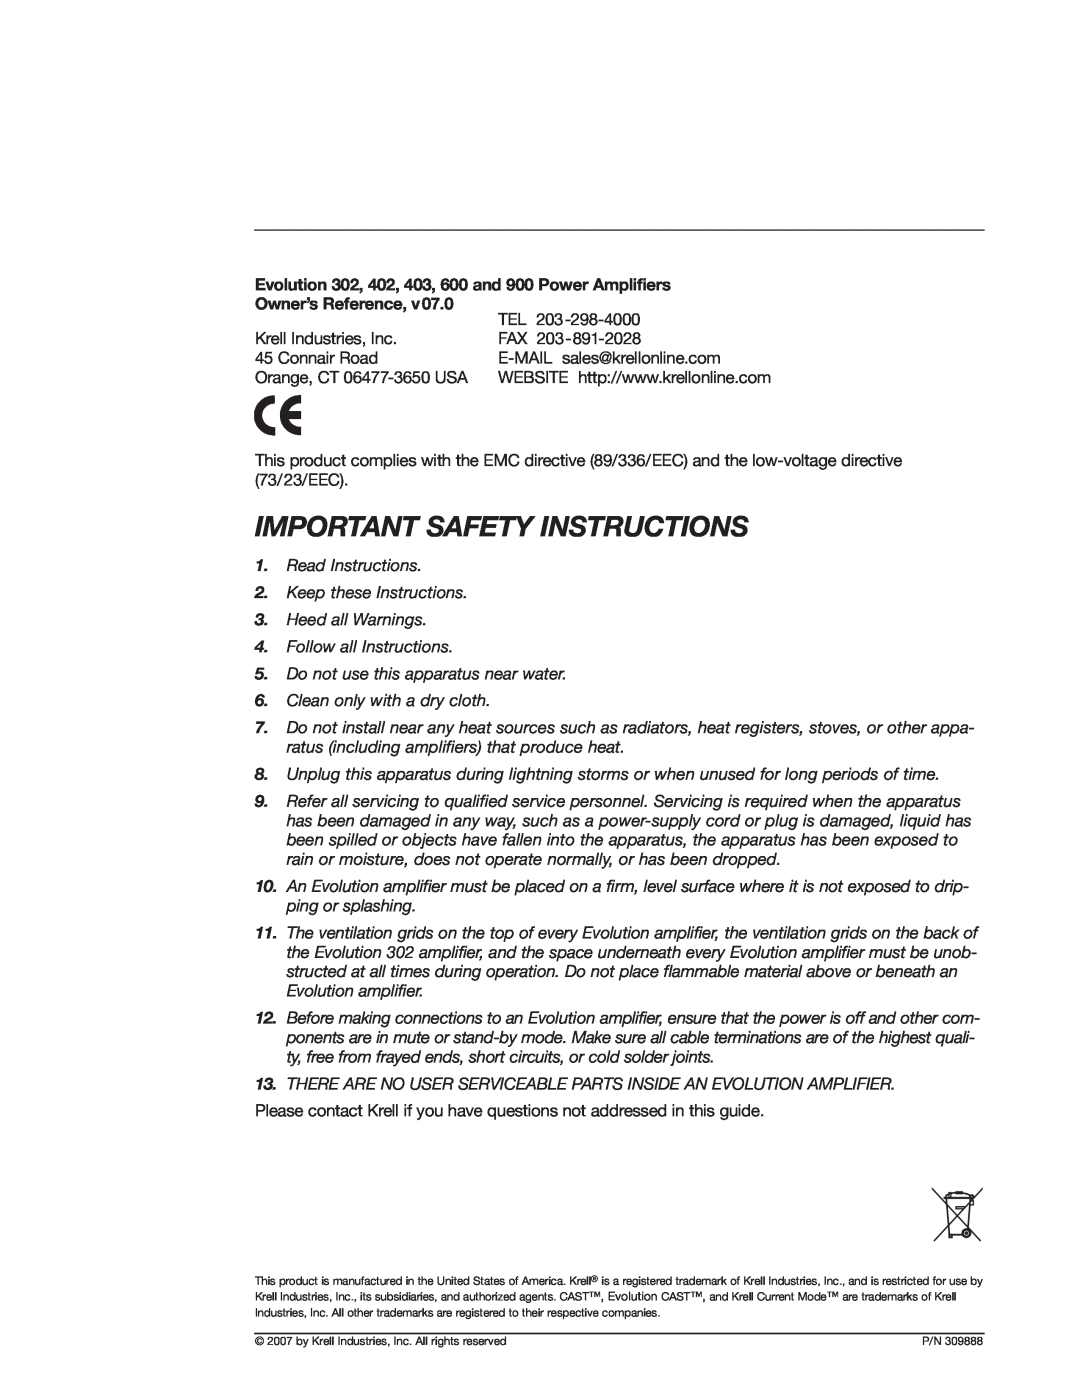 Krell Industries Evolution manual Important Safety Instructions, Owner’s Reference 